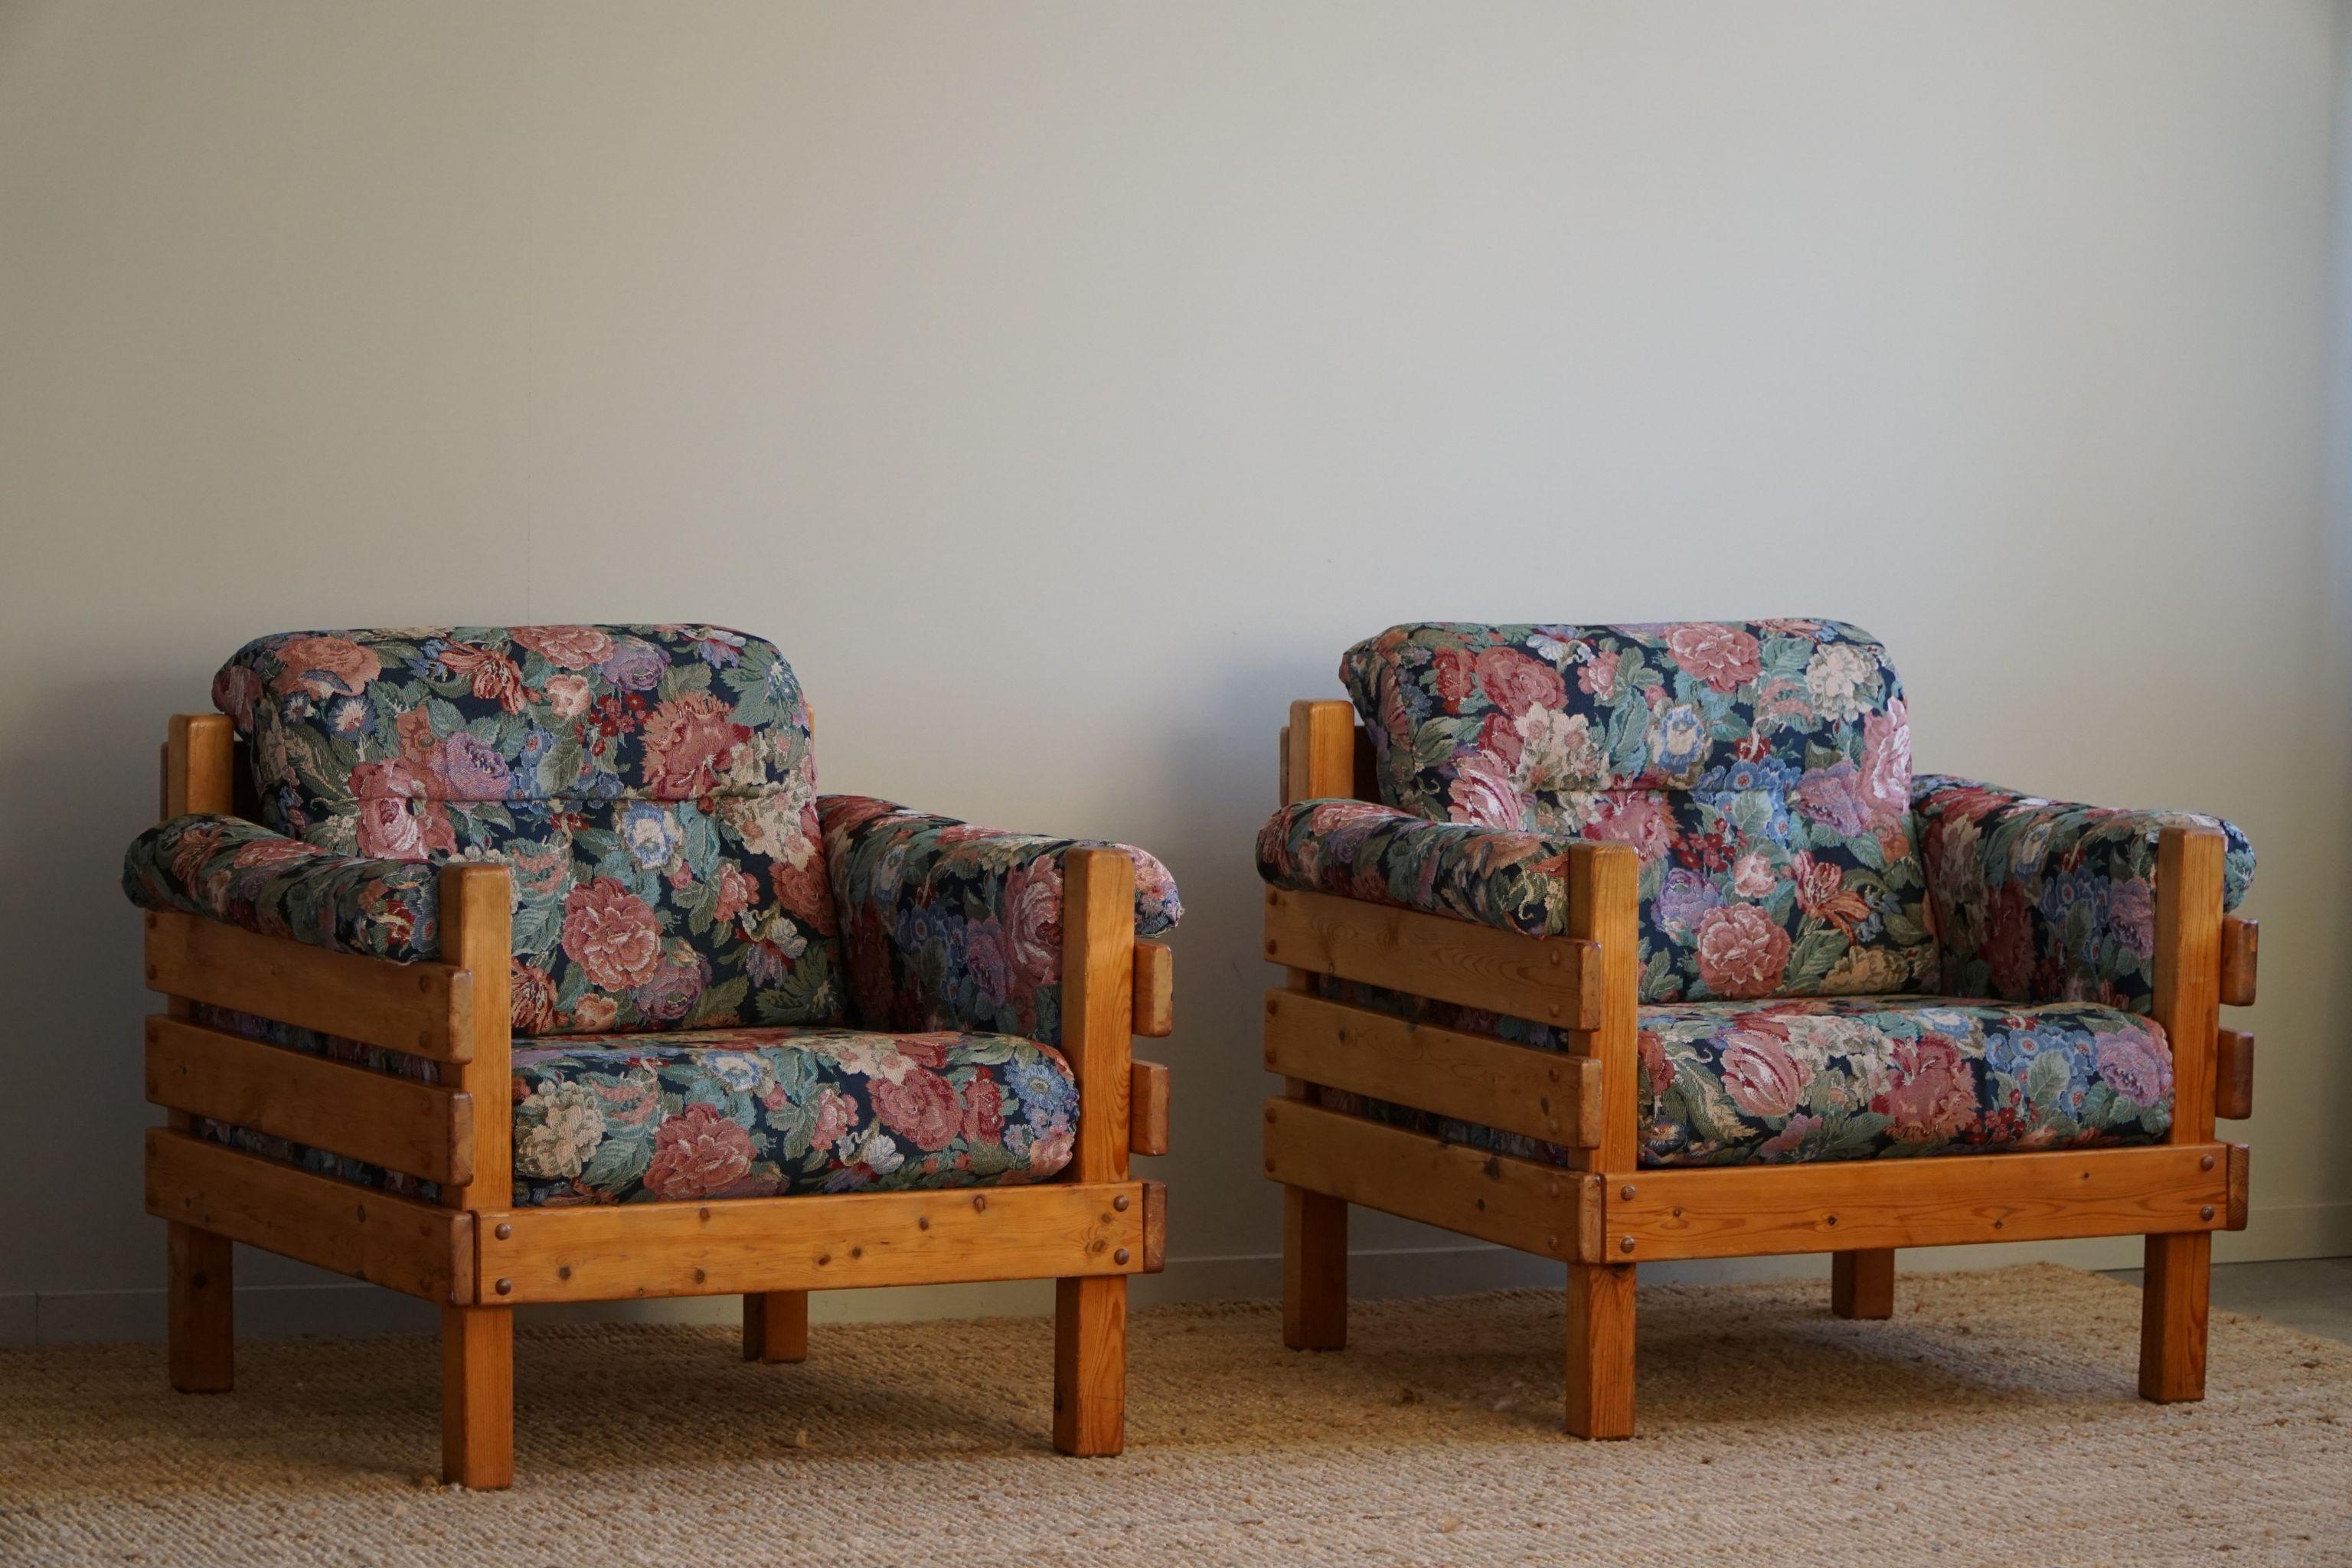 Pair of Brutalist Lounge Chairs in Solid Pine, Swedish Modern, Made in 1970s For Sale 3